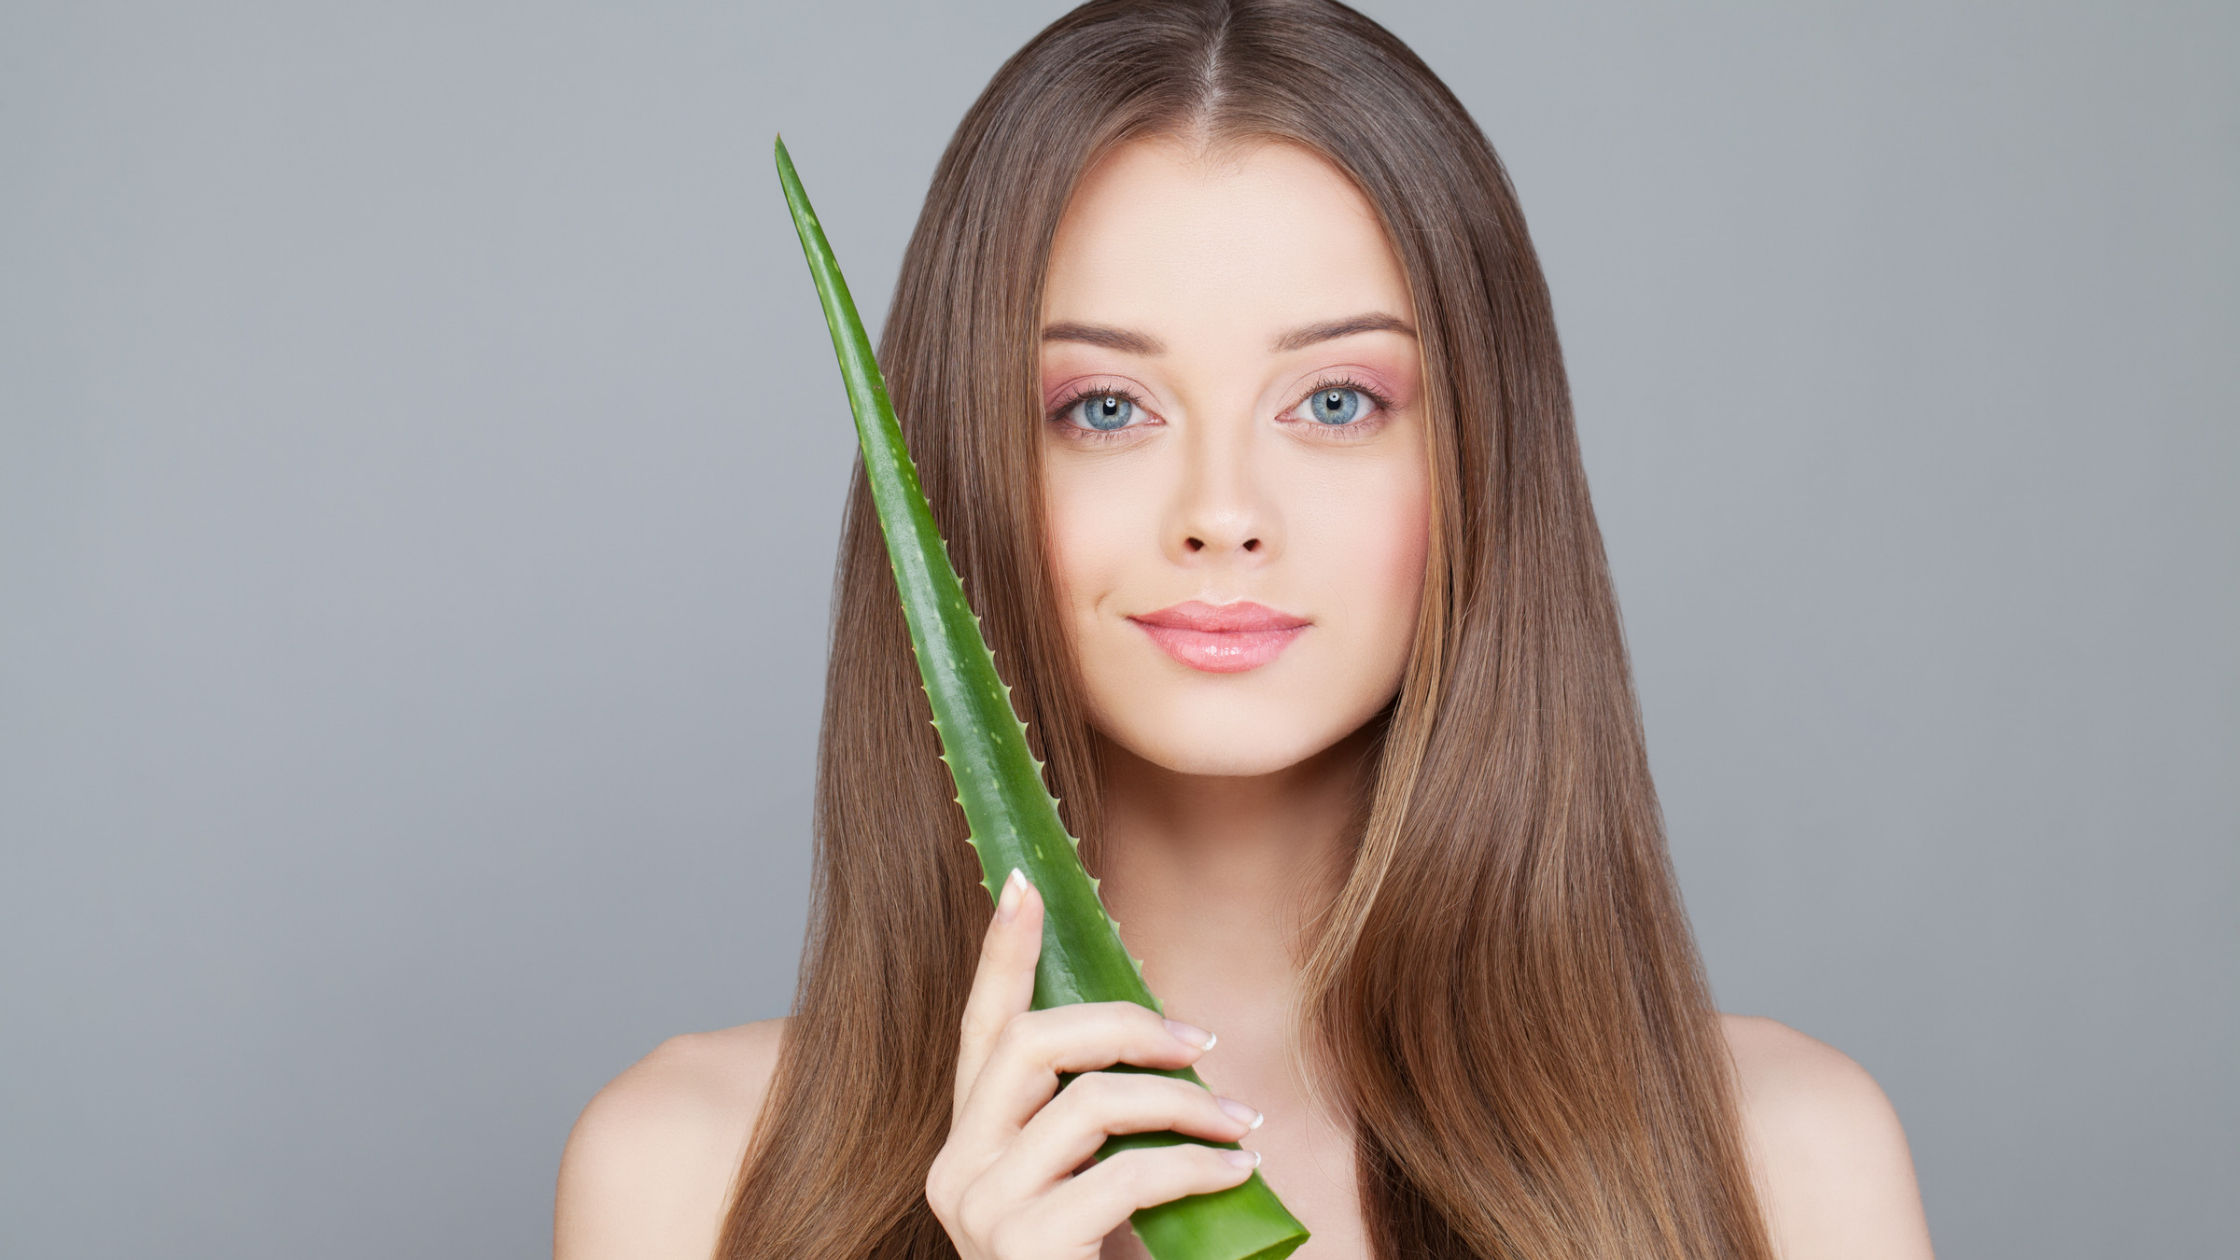 How To Use Aloe Vera For Skin Whitening